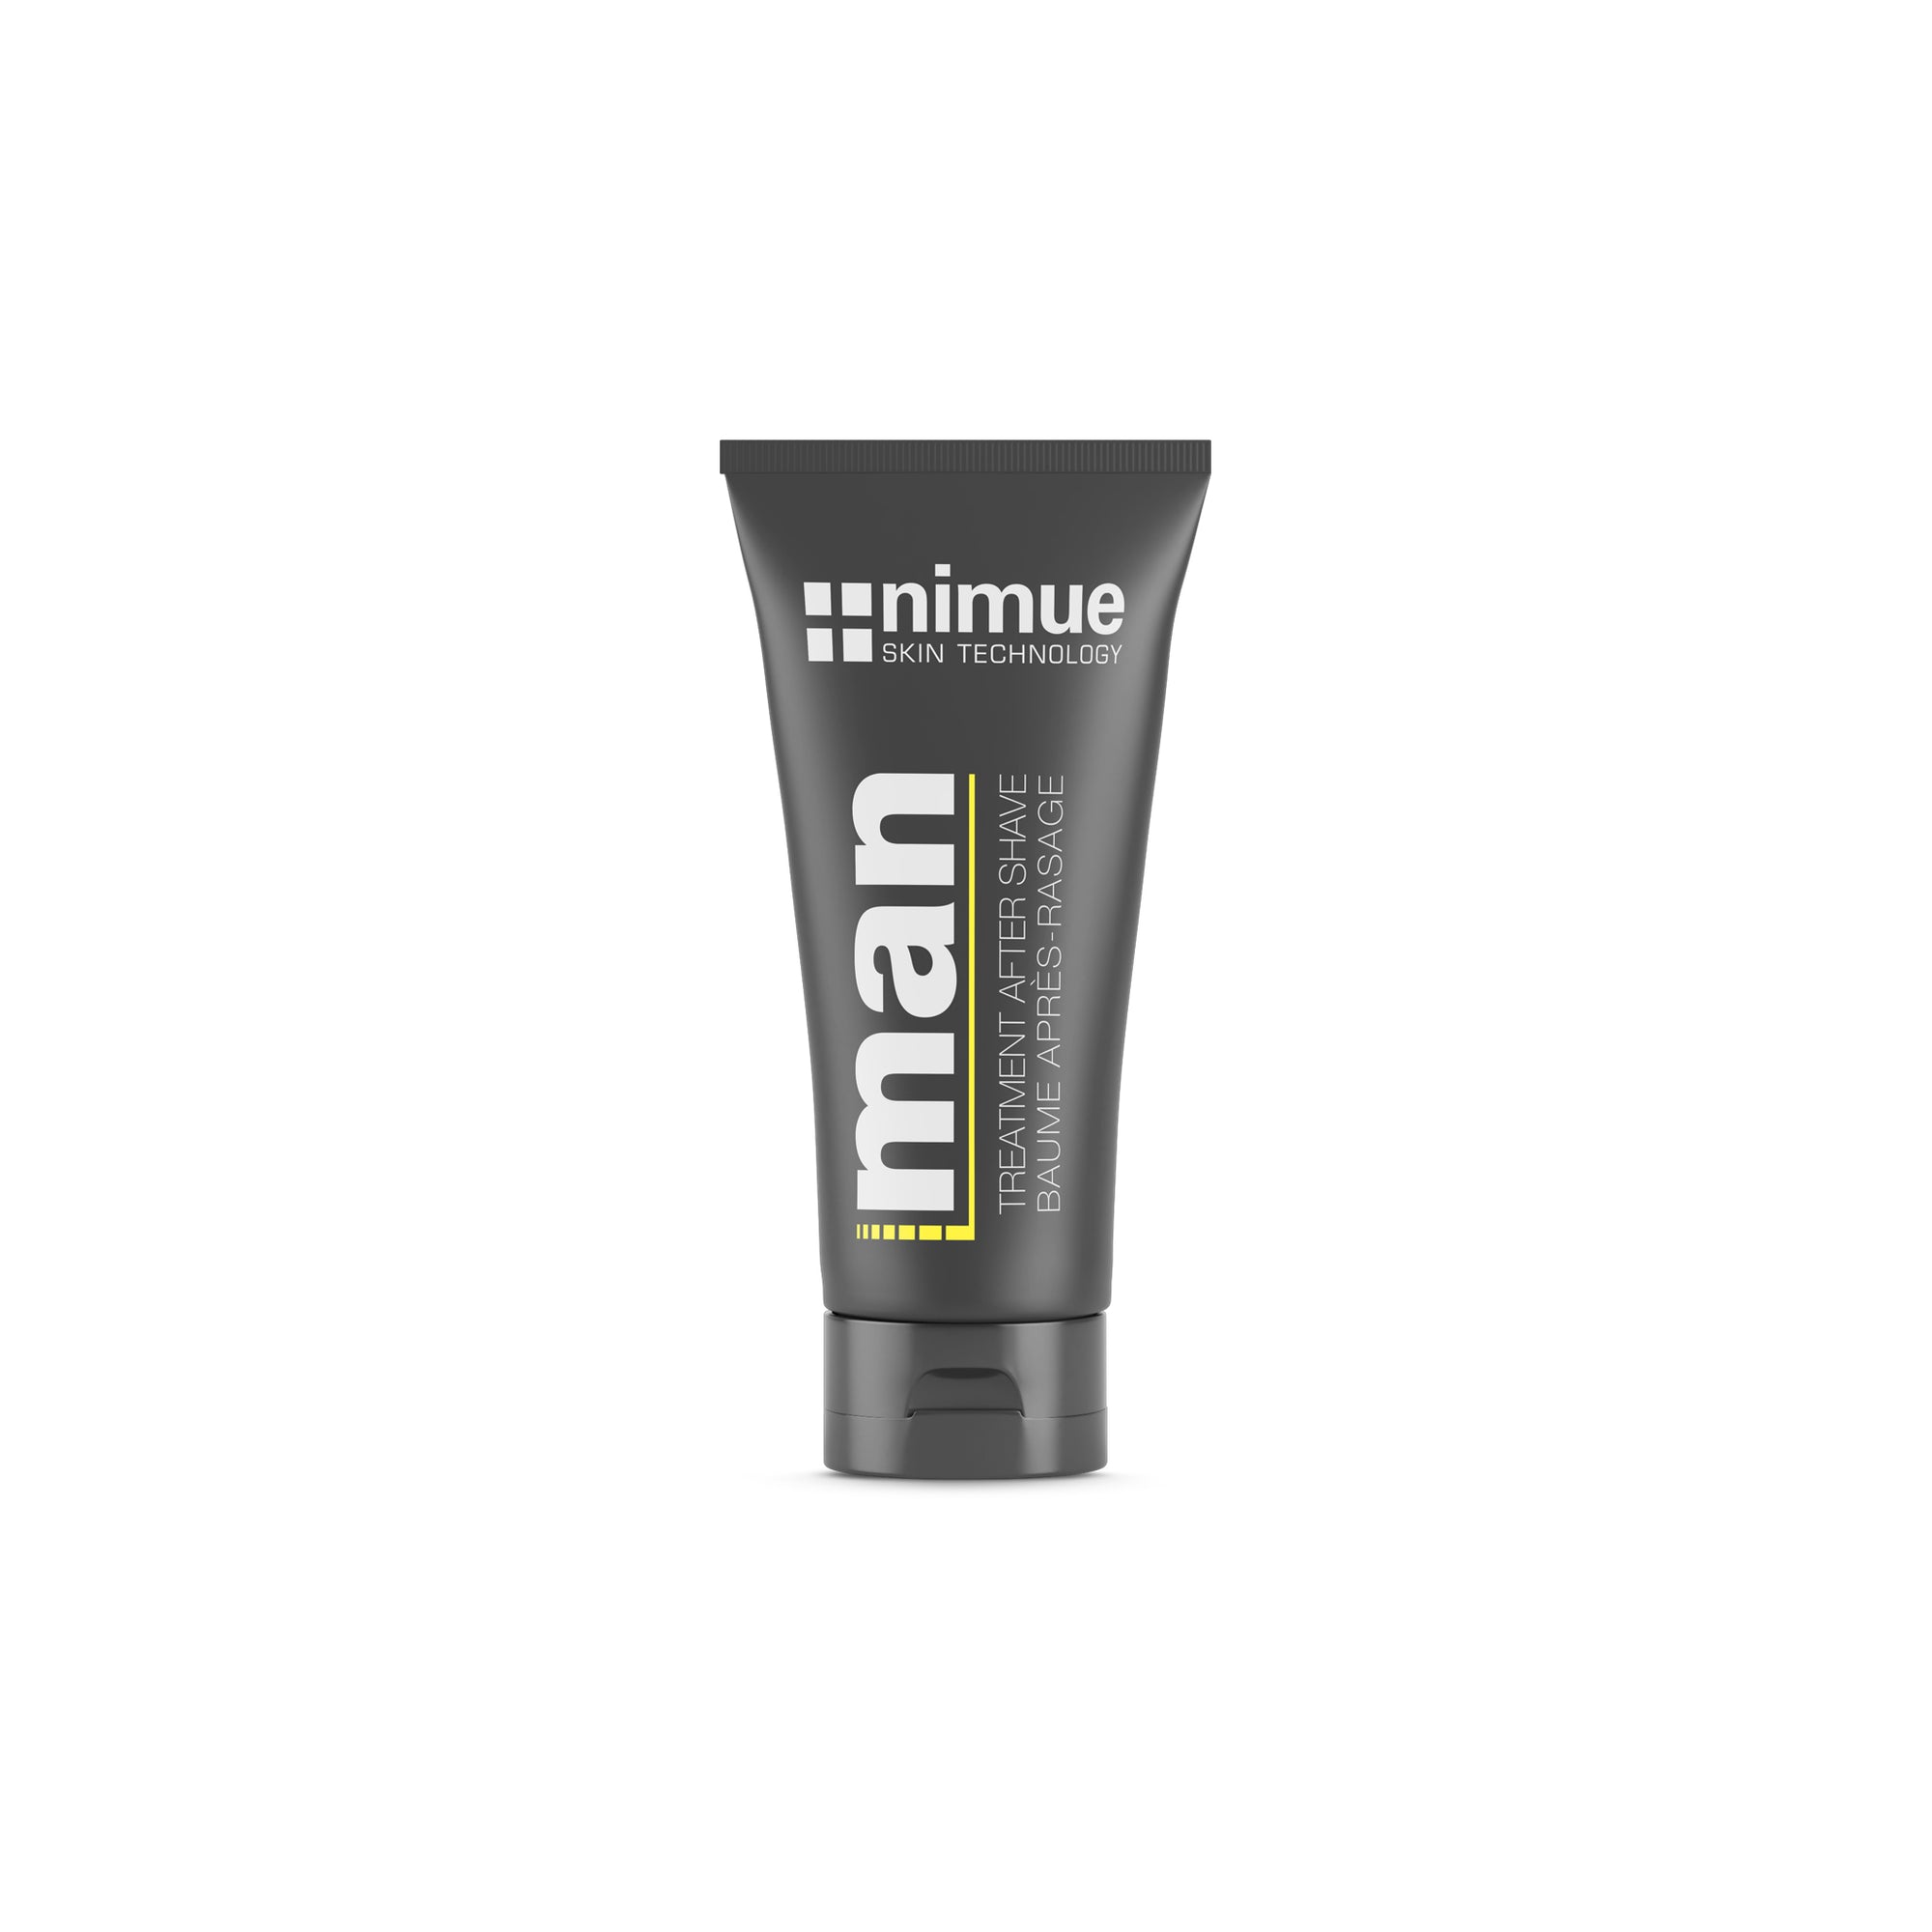 Nimue Man Treatment Aftershave 100ml